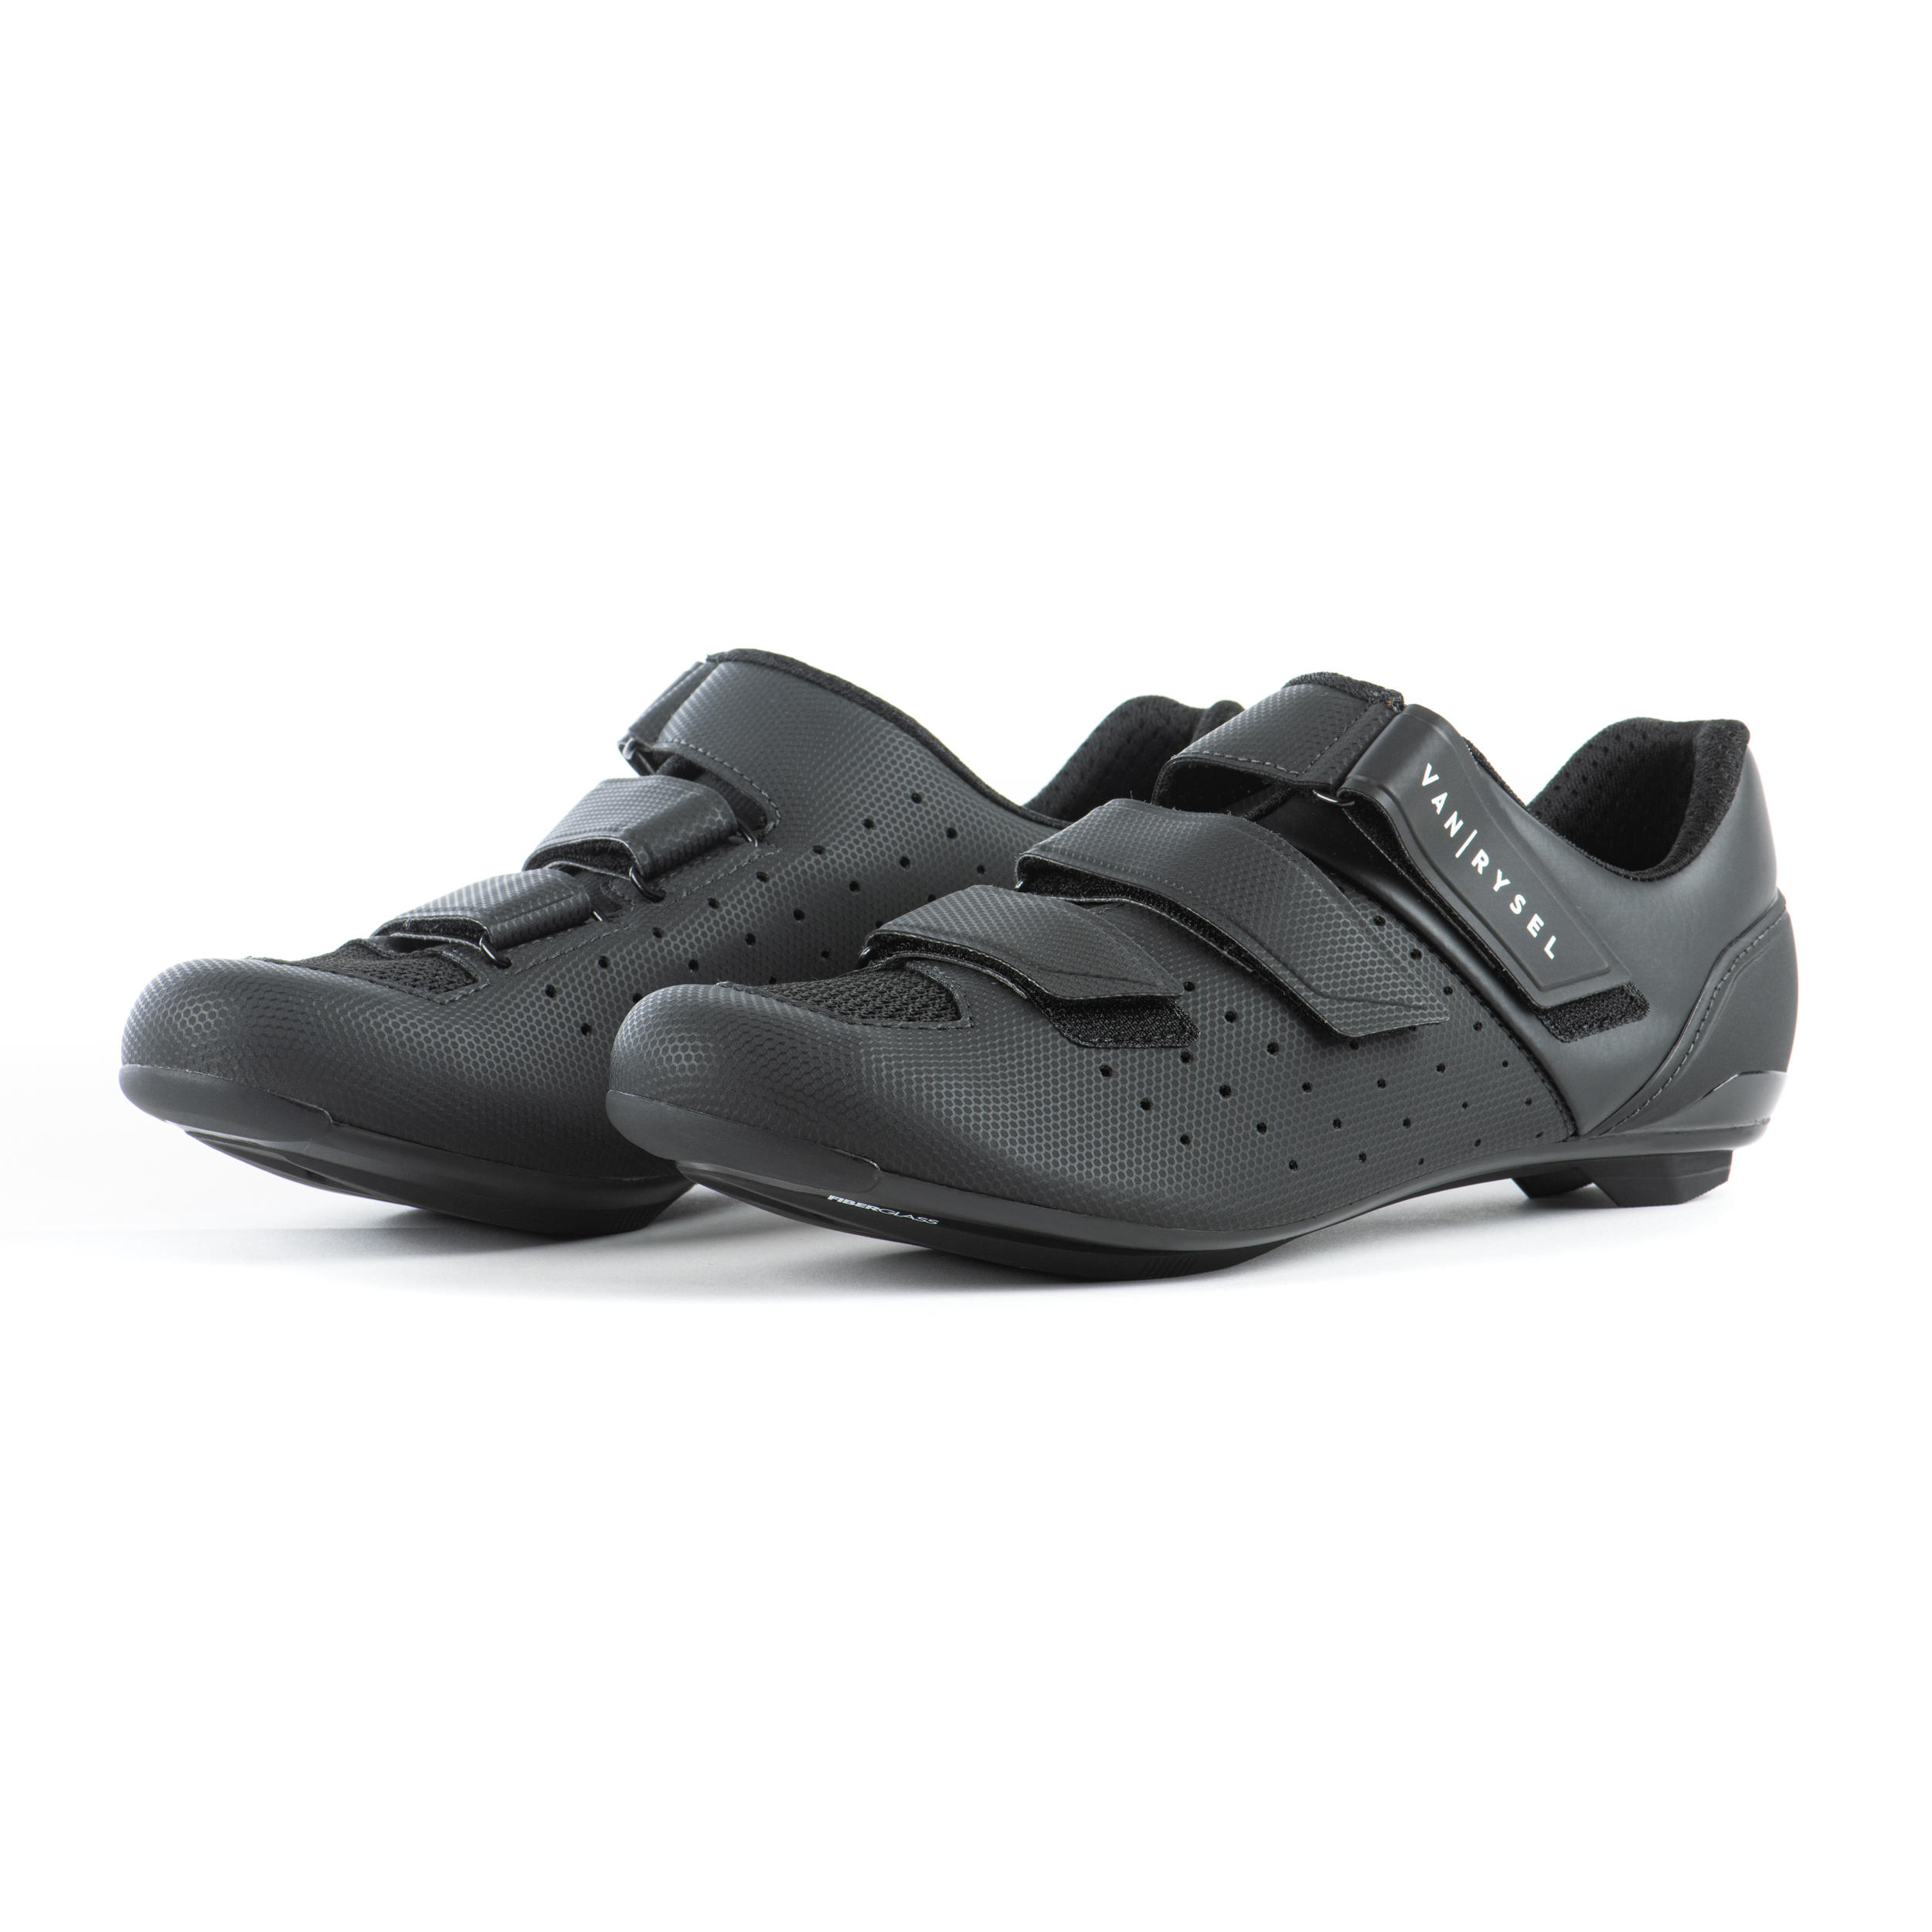 500 Sport Road Cycling Shoes - Decathlon